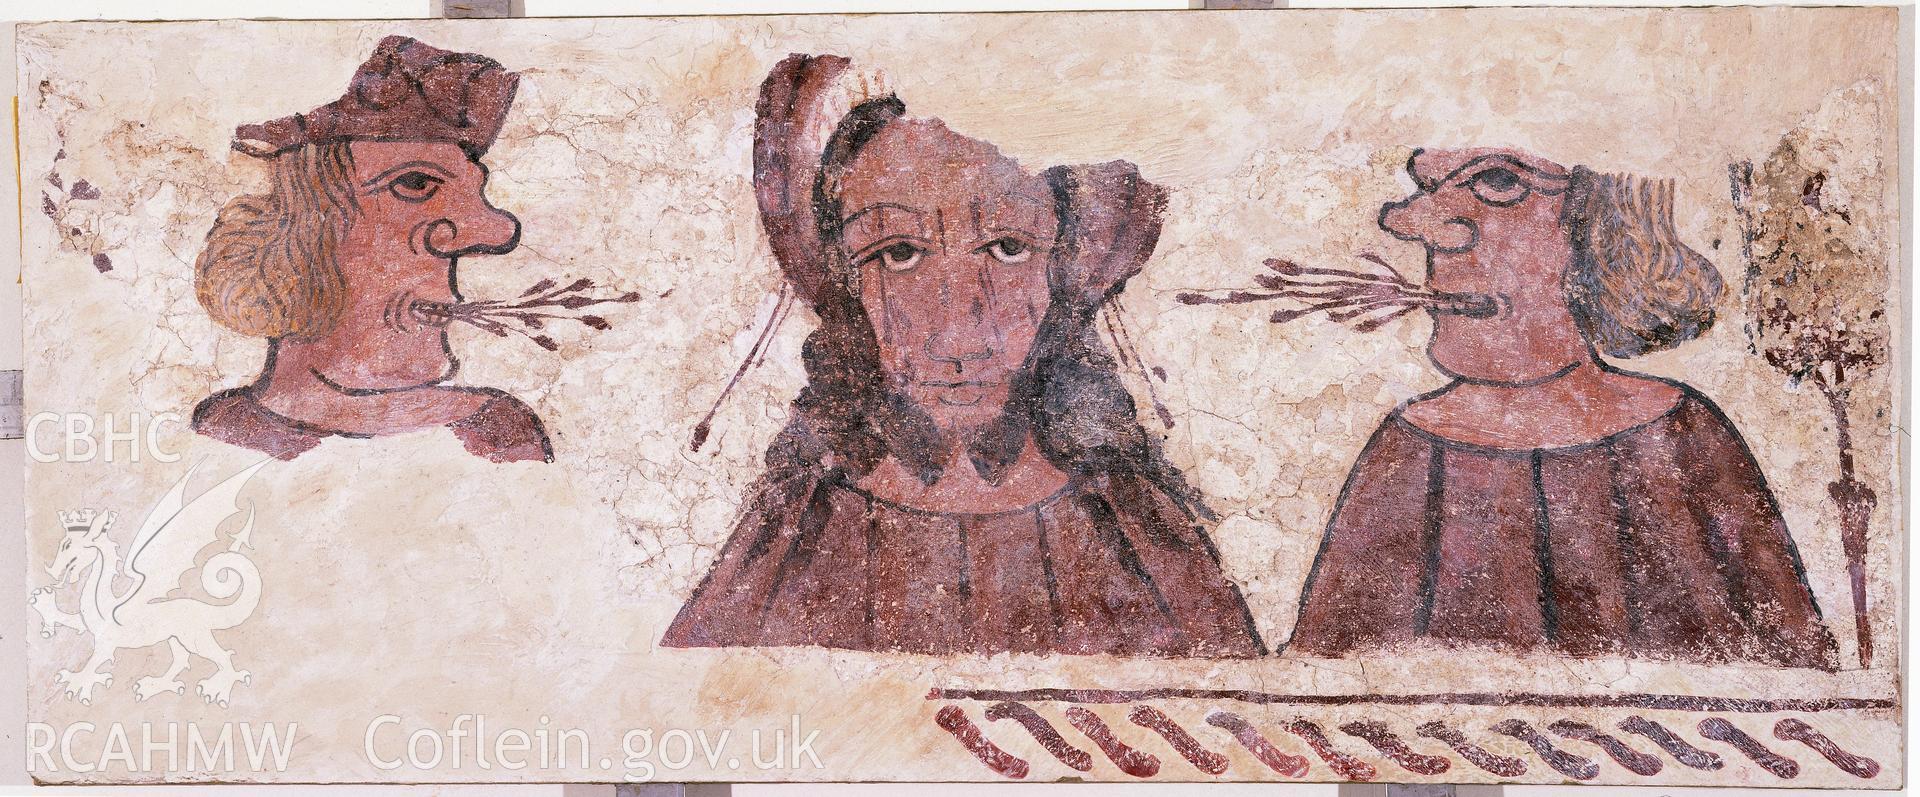 RCAHMW colour transparency of wallpainting of the Mocking of Christ at Llandeilo Talybont Church.